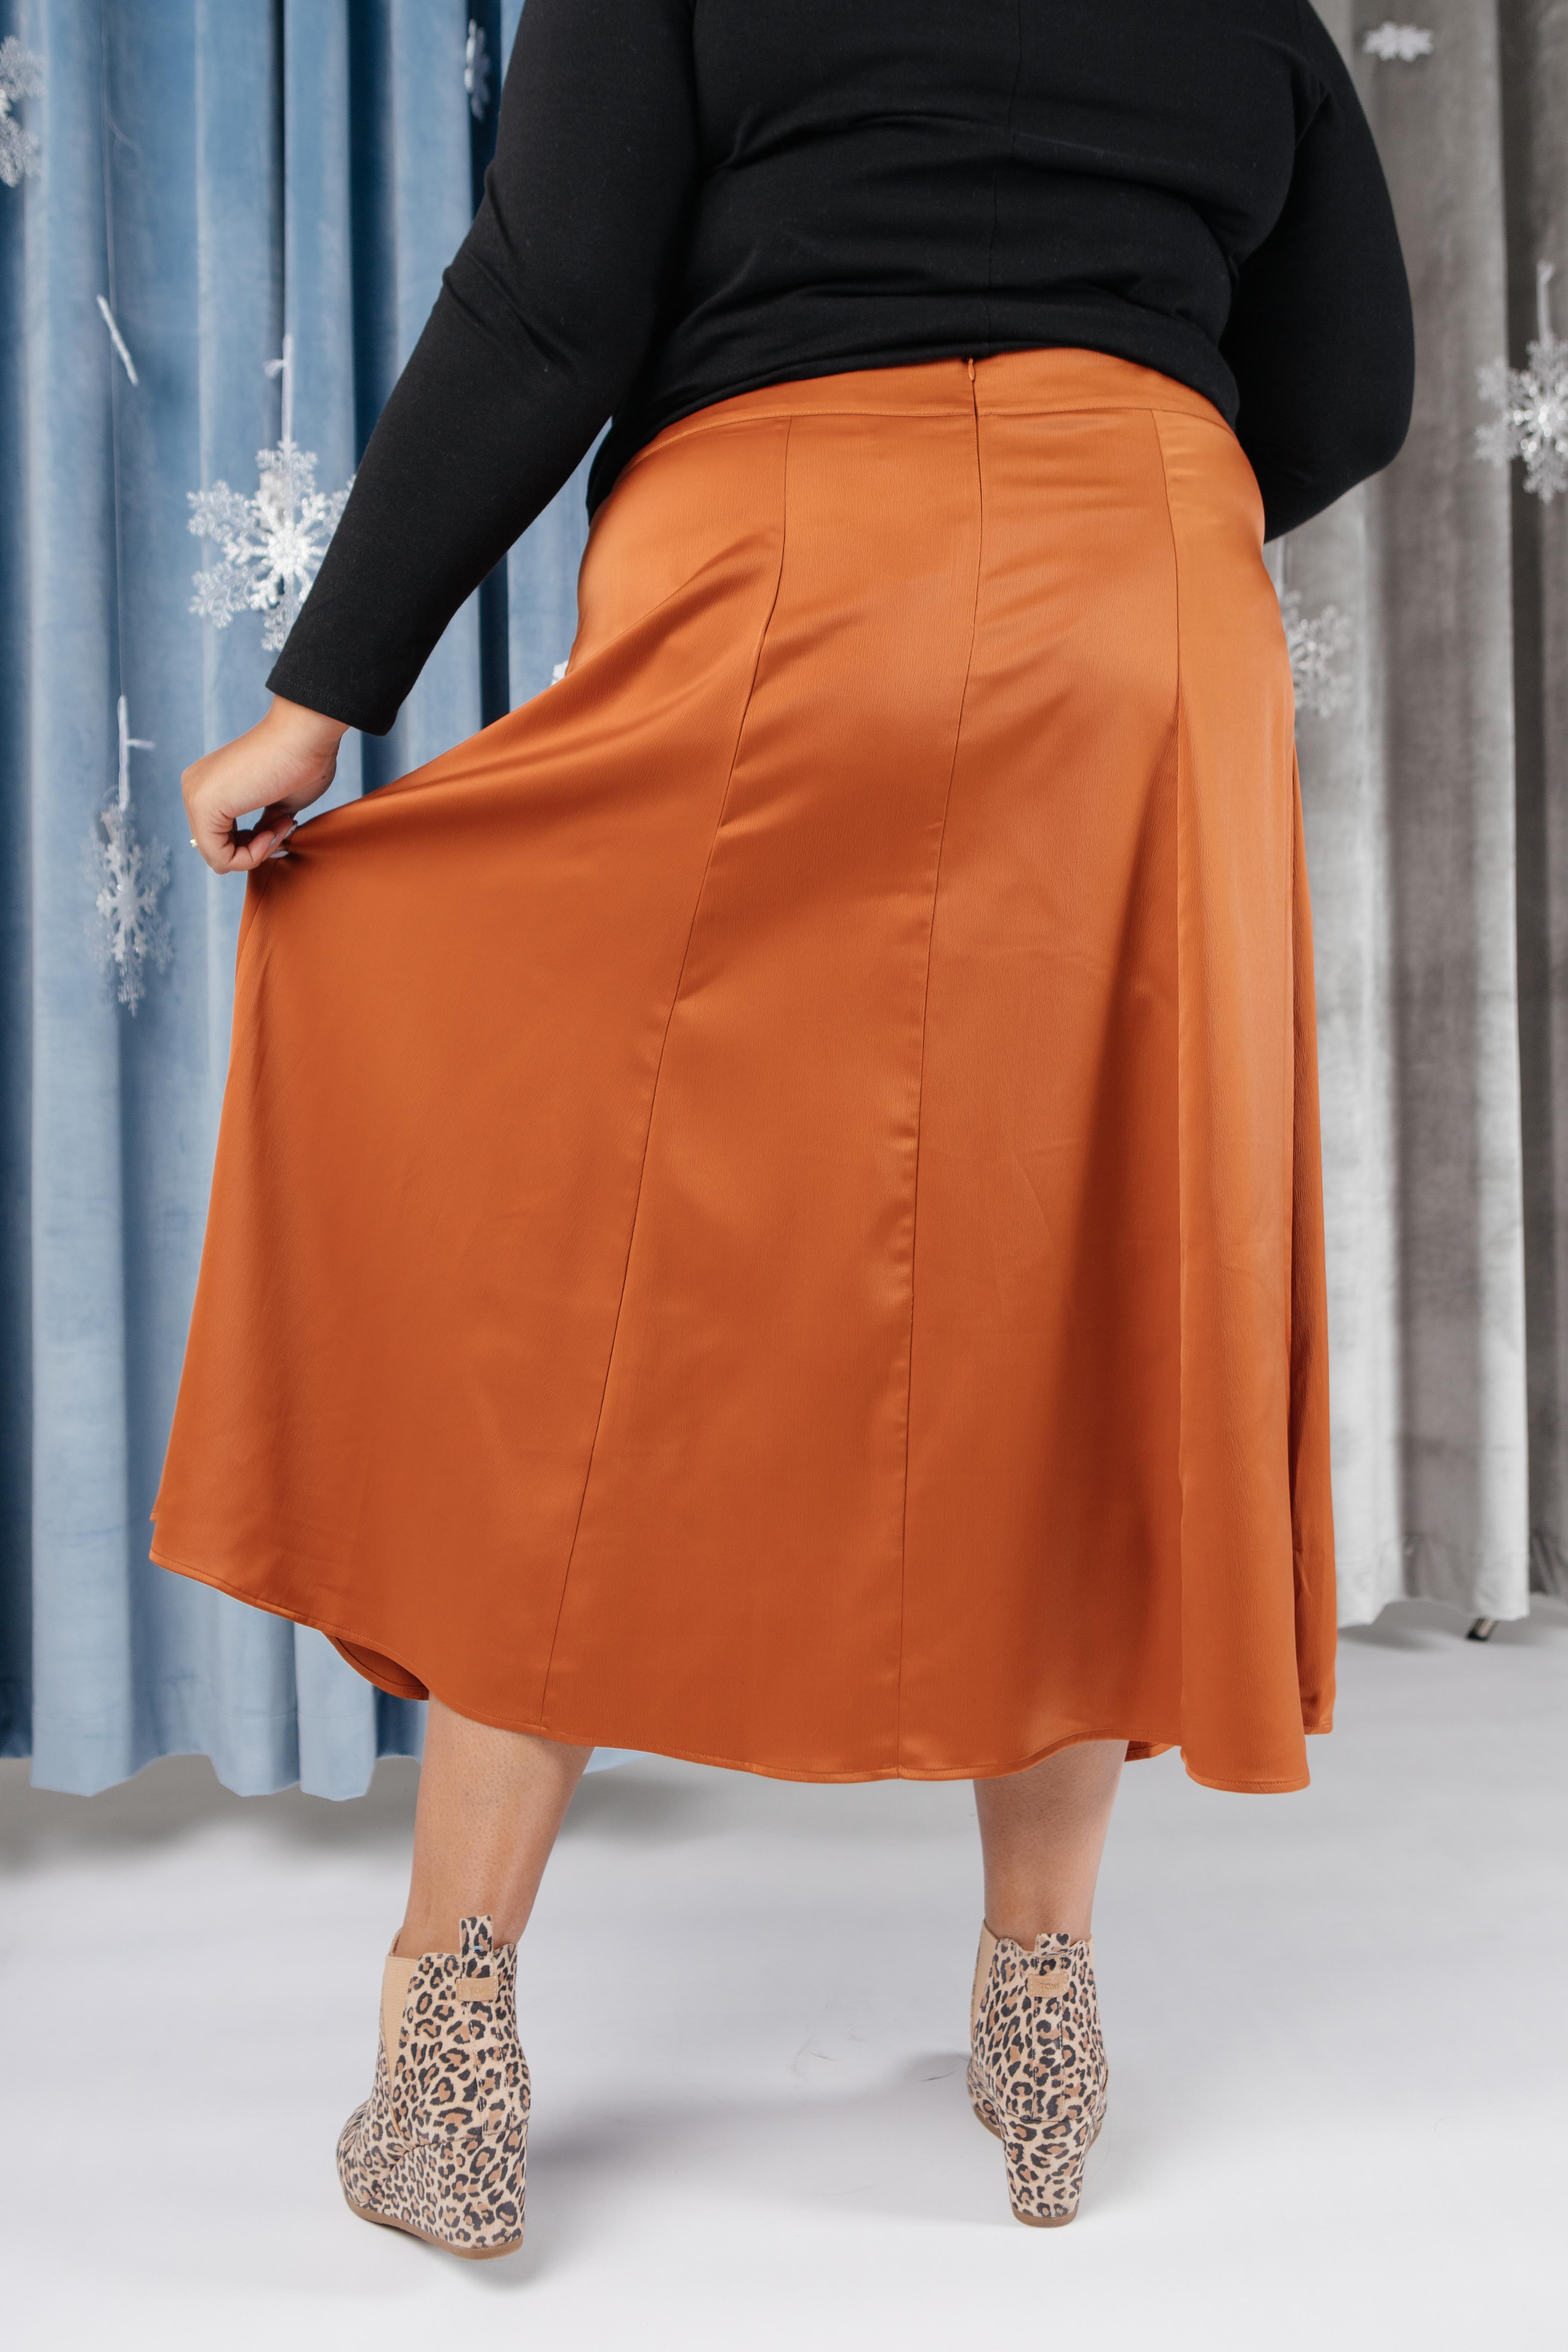 Once Upon A Time Skirt in Tangerine